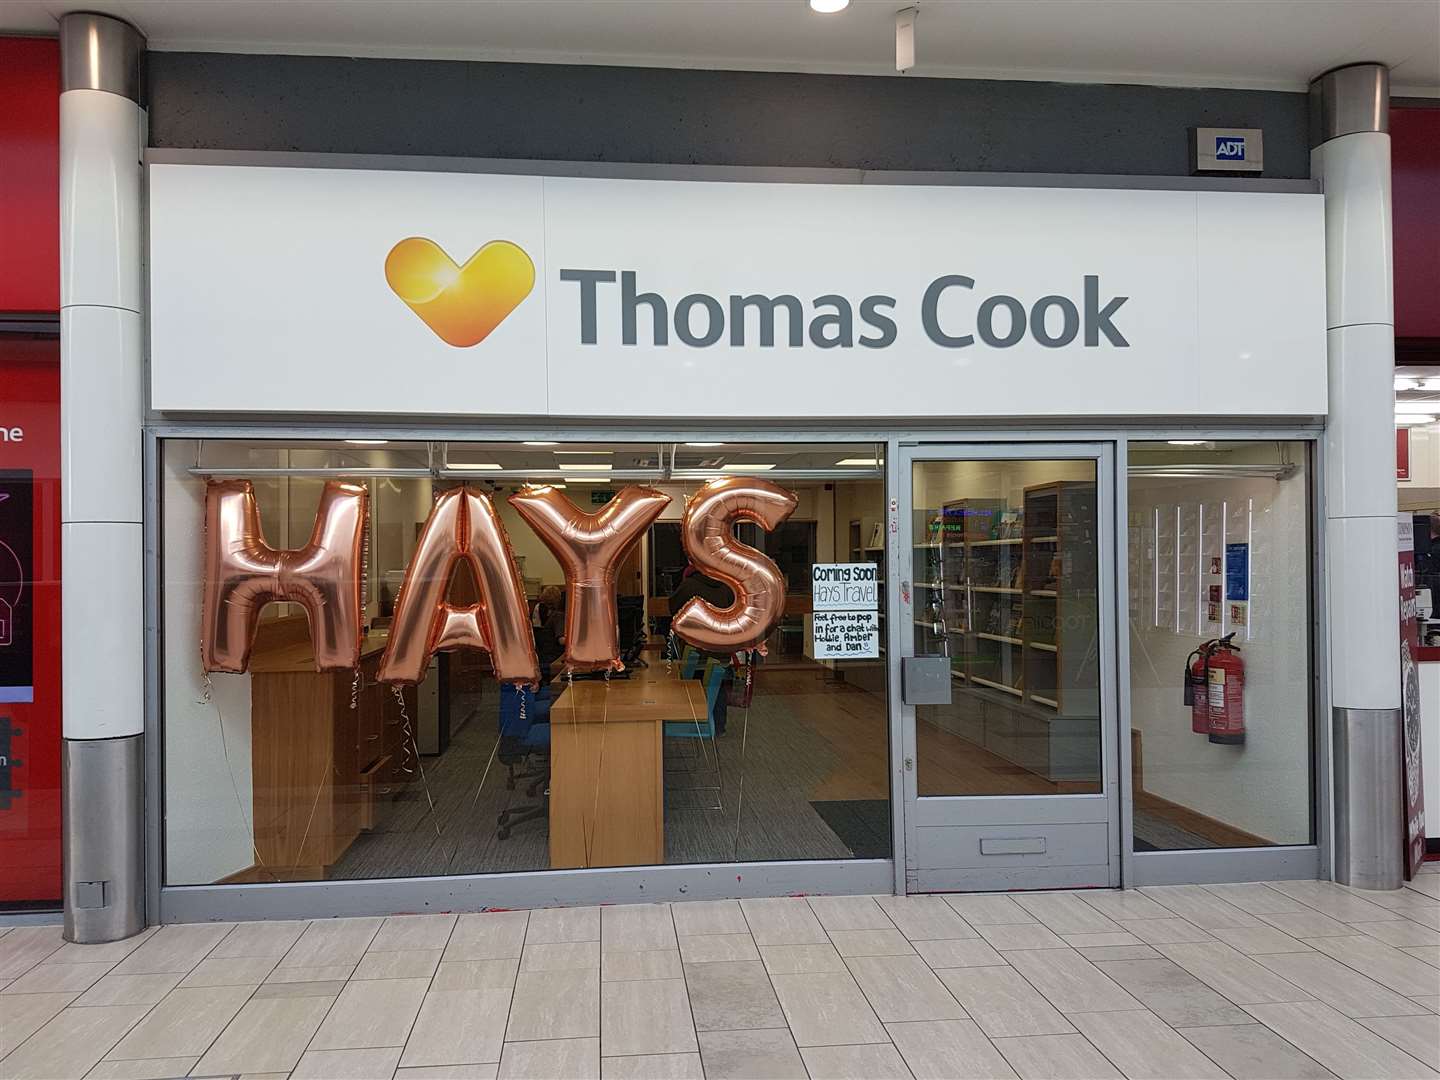 Thomas Cook in Ashford, now under the Hays Travel